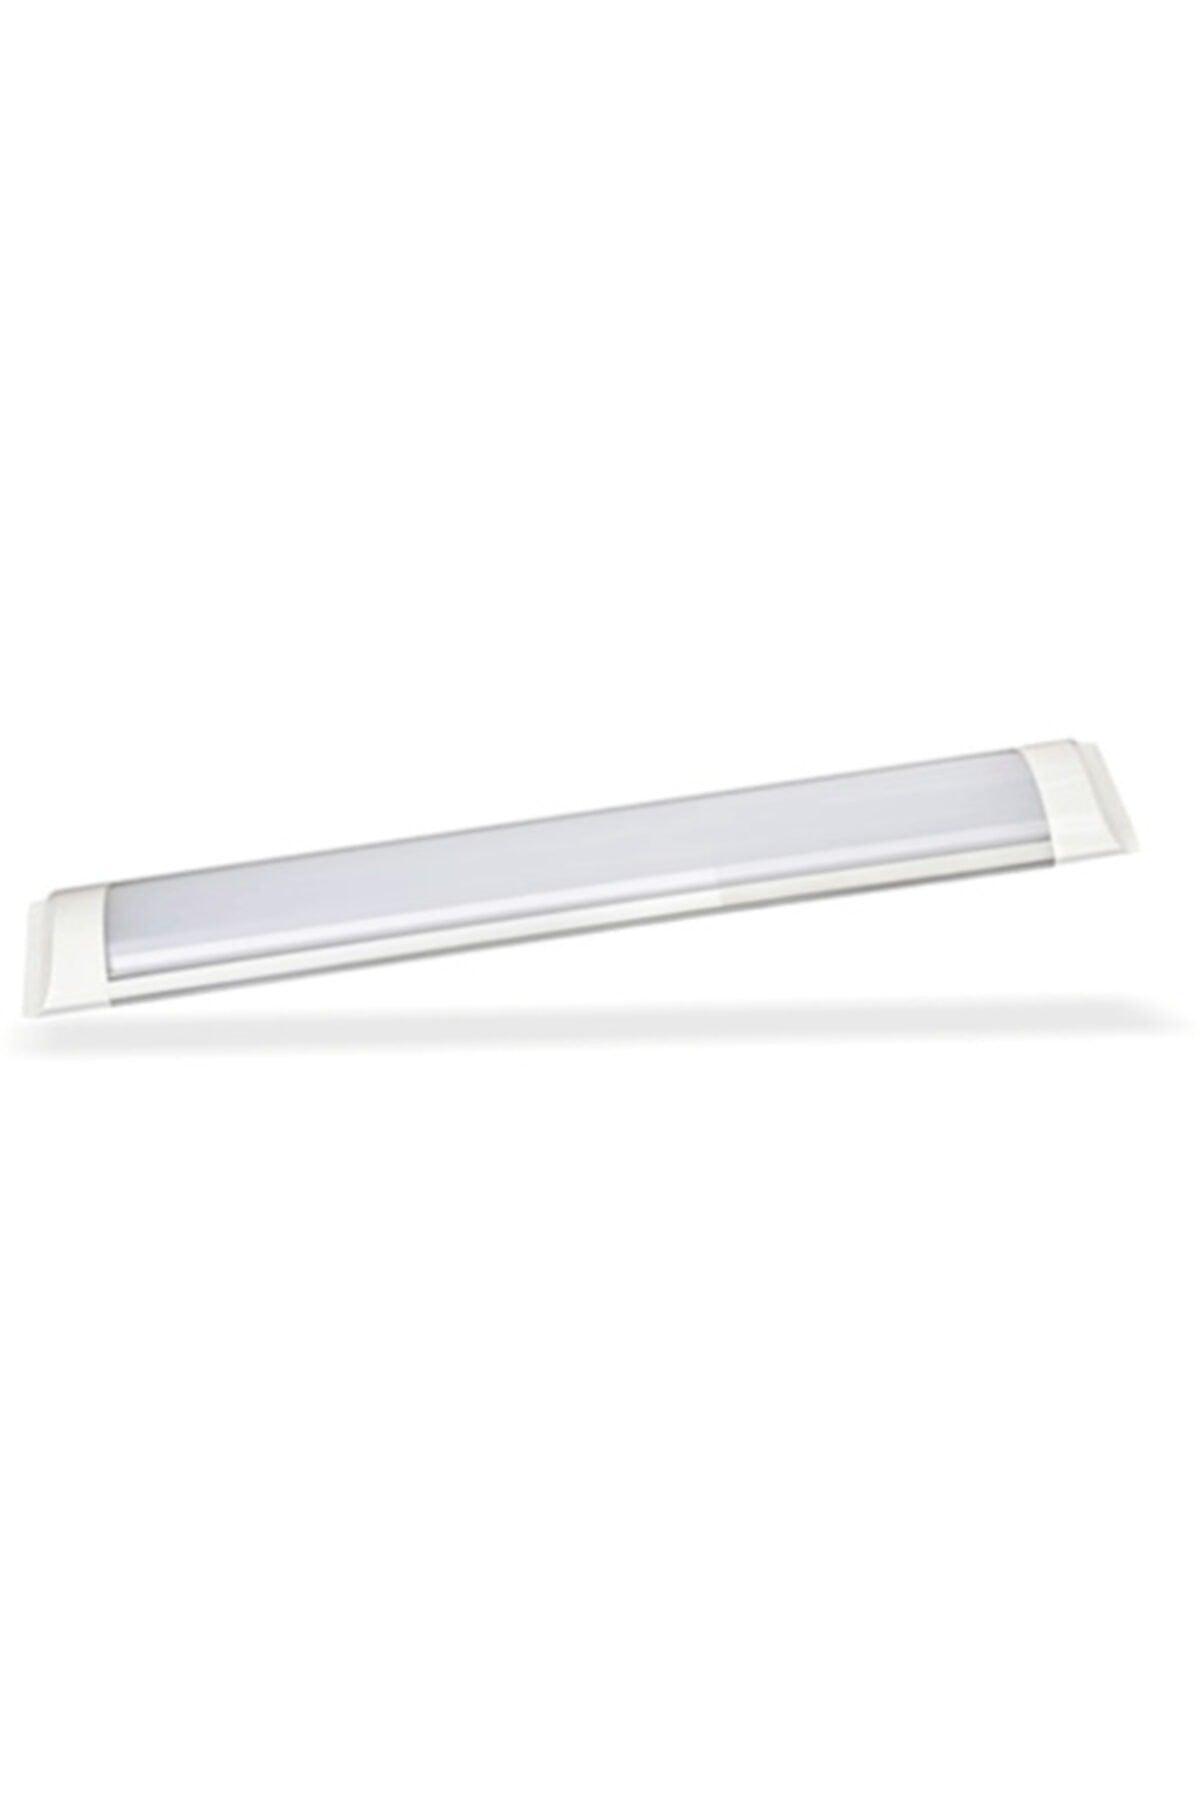 36w Band Luminaire 30 Pieces White Light 2400lm